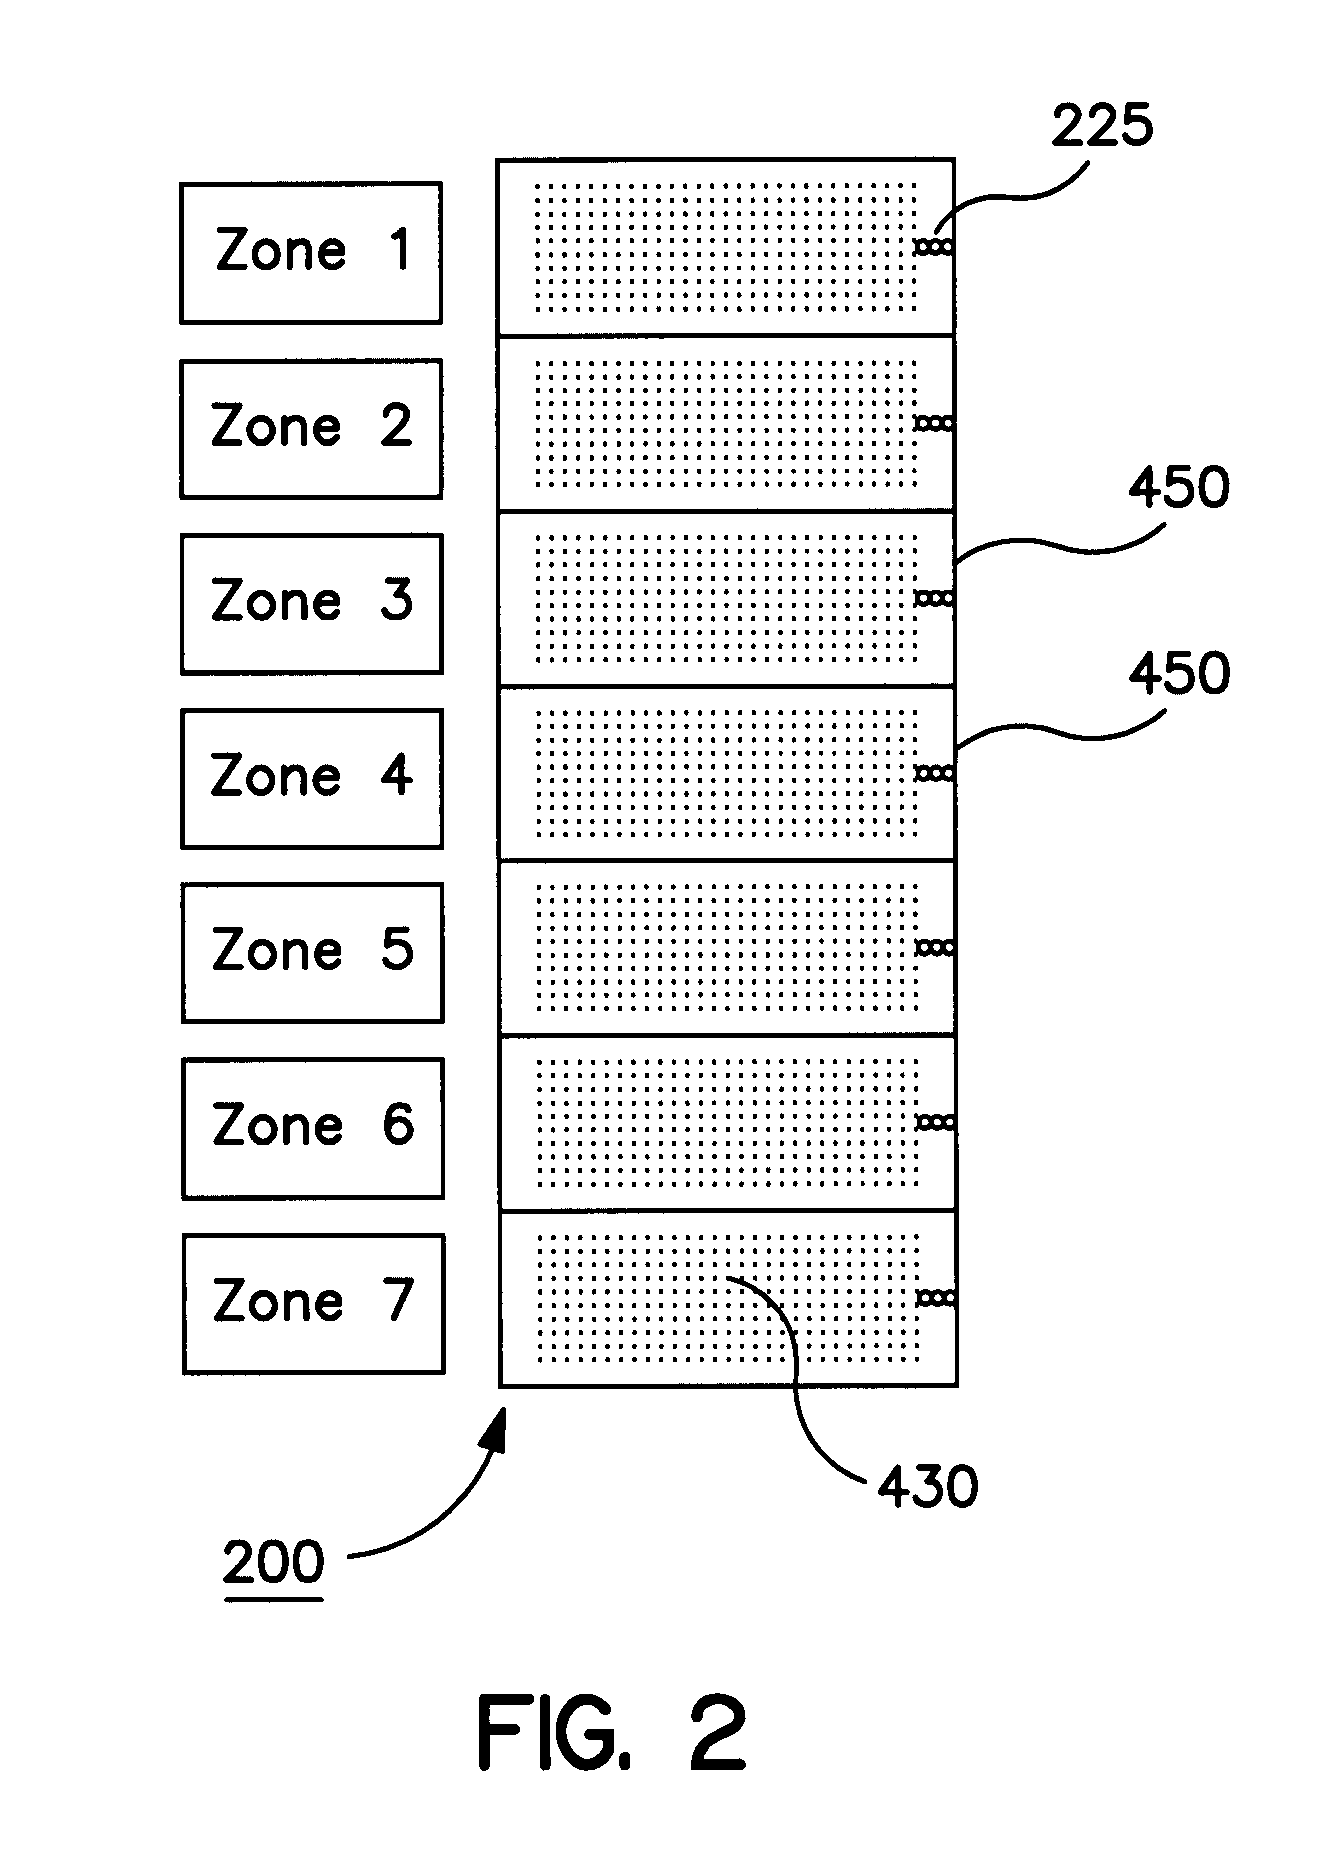 Universal microarray system